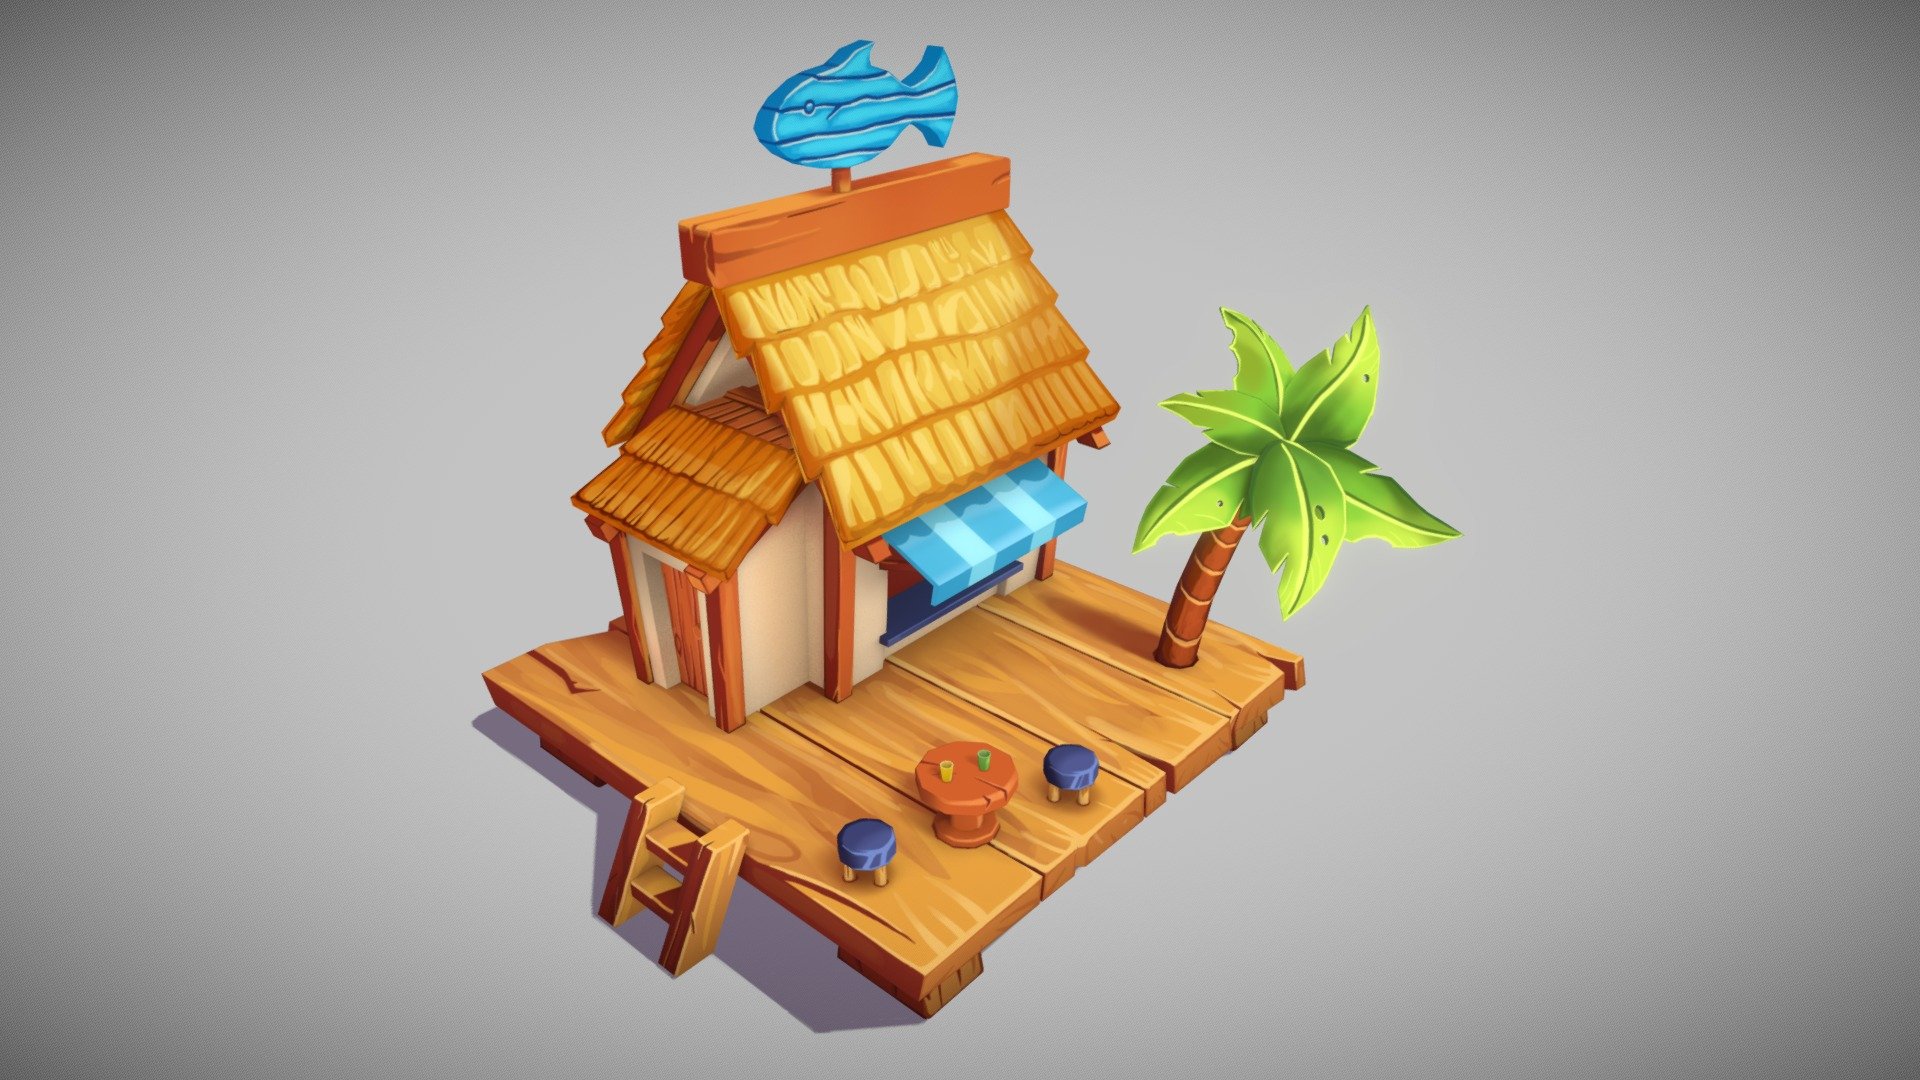 Small building/environment, made from concept. Modelled in Maya and textured in Substance Painter.

Original concept:
https://www.artstation.com/artwork/1nm3XX - Beach Restaurant/Tropical Kiosk - 3D model by Sparkywor 3d model